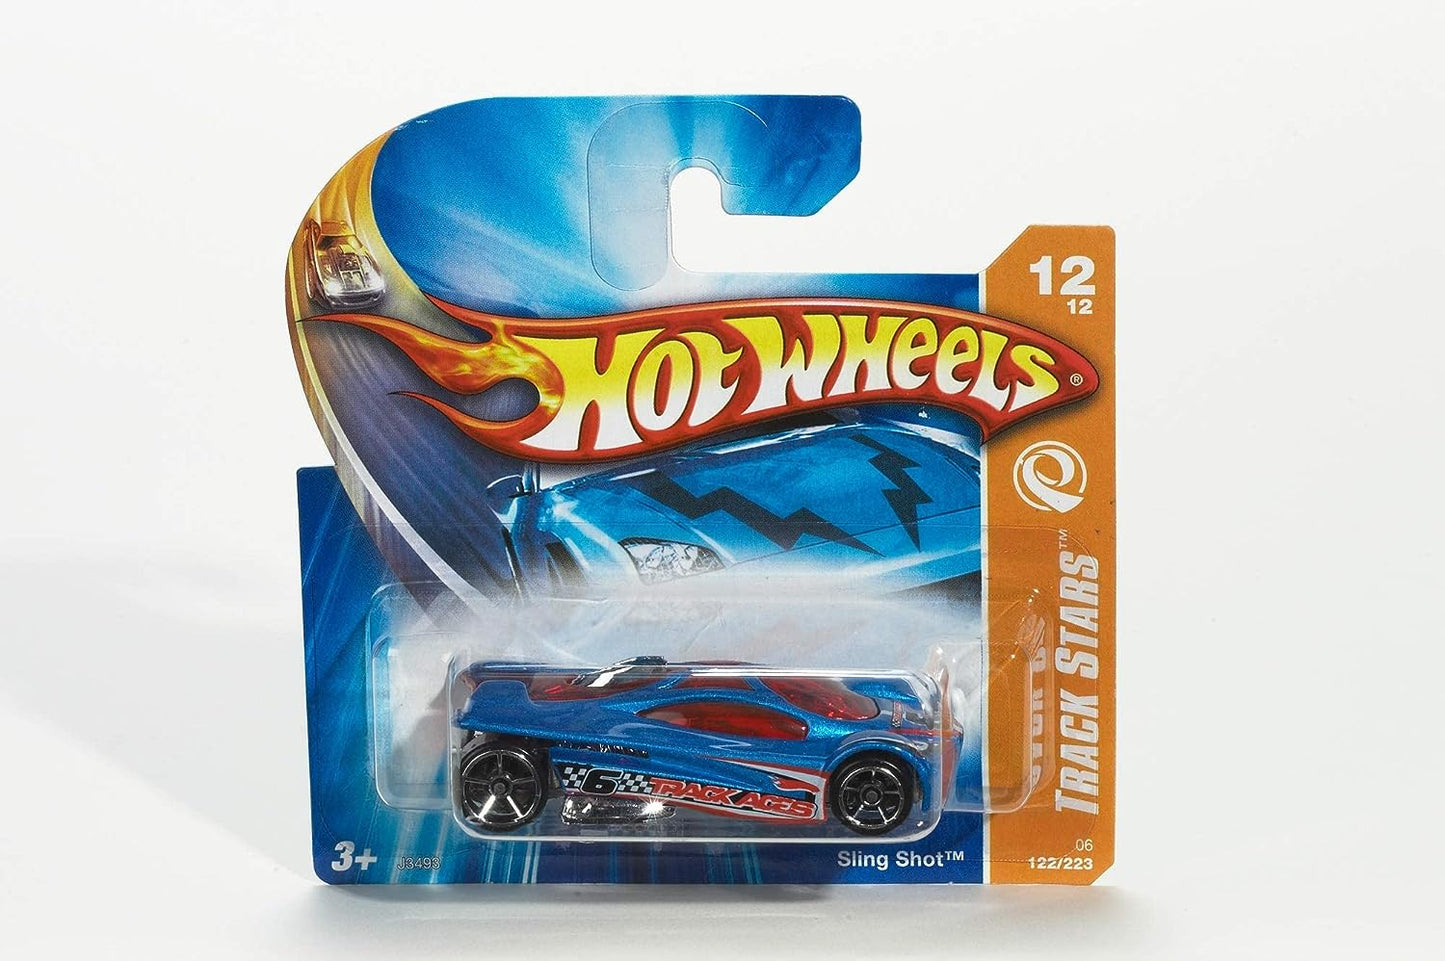 Hot Wheels  Assorted Basic Car Assortment, 1:64 Scale, Realistic Details, Ideal for Collectors, Varying Colors and Designs- 1 Pcs Pk